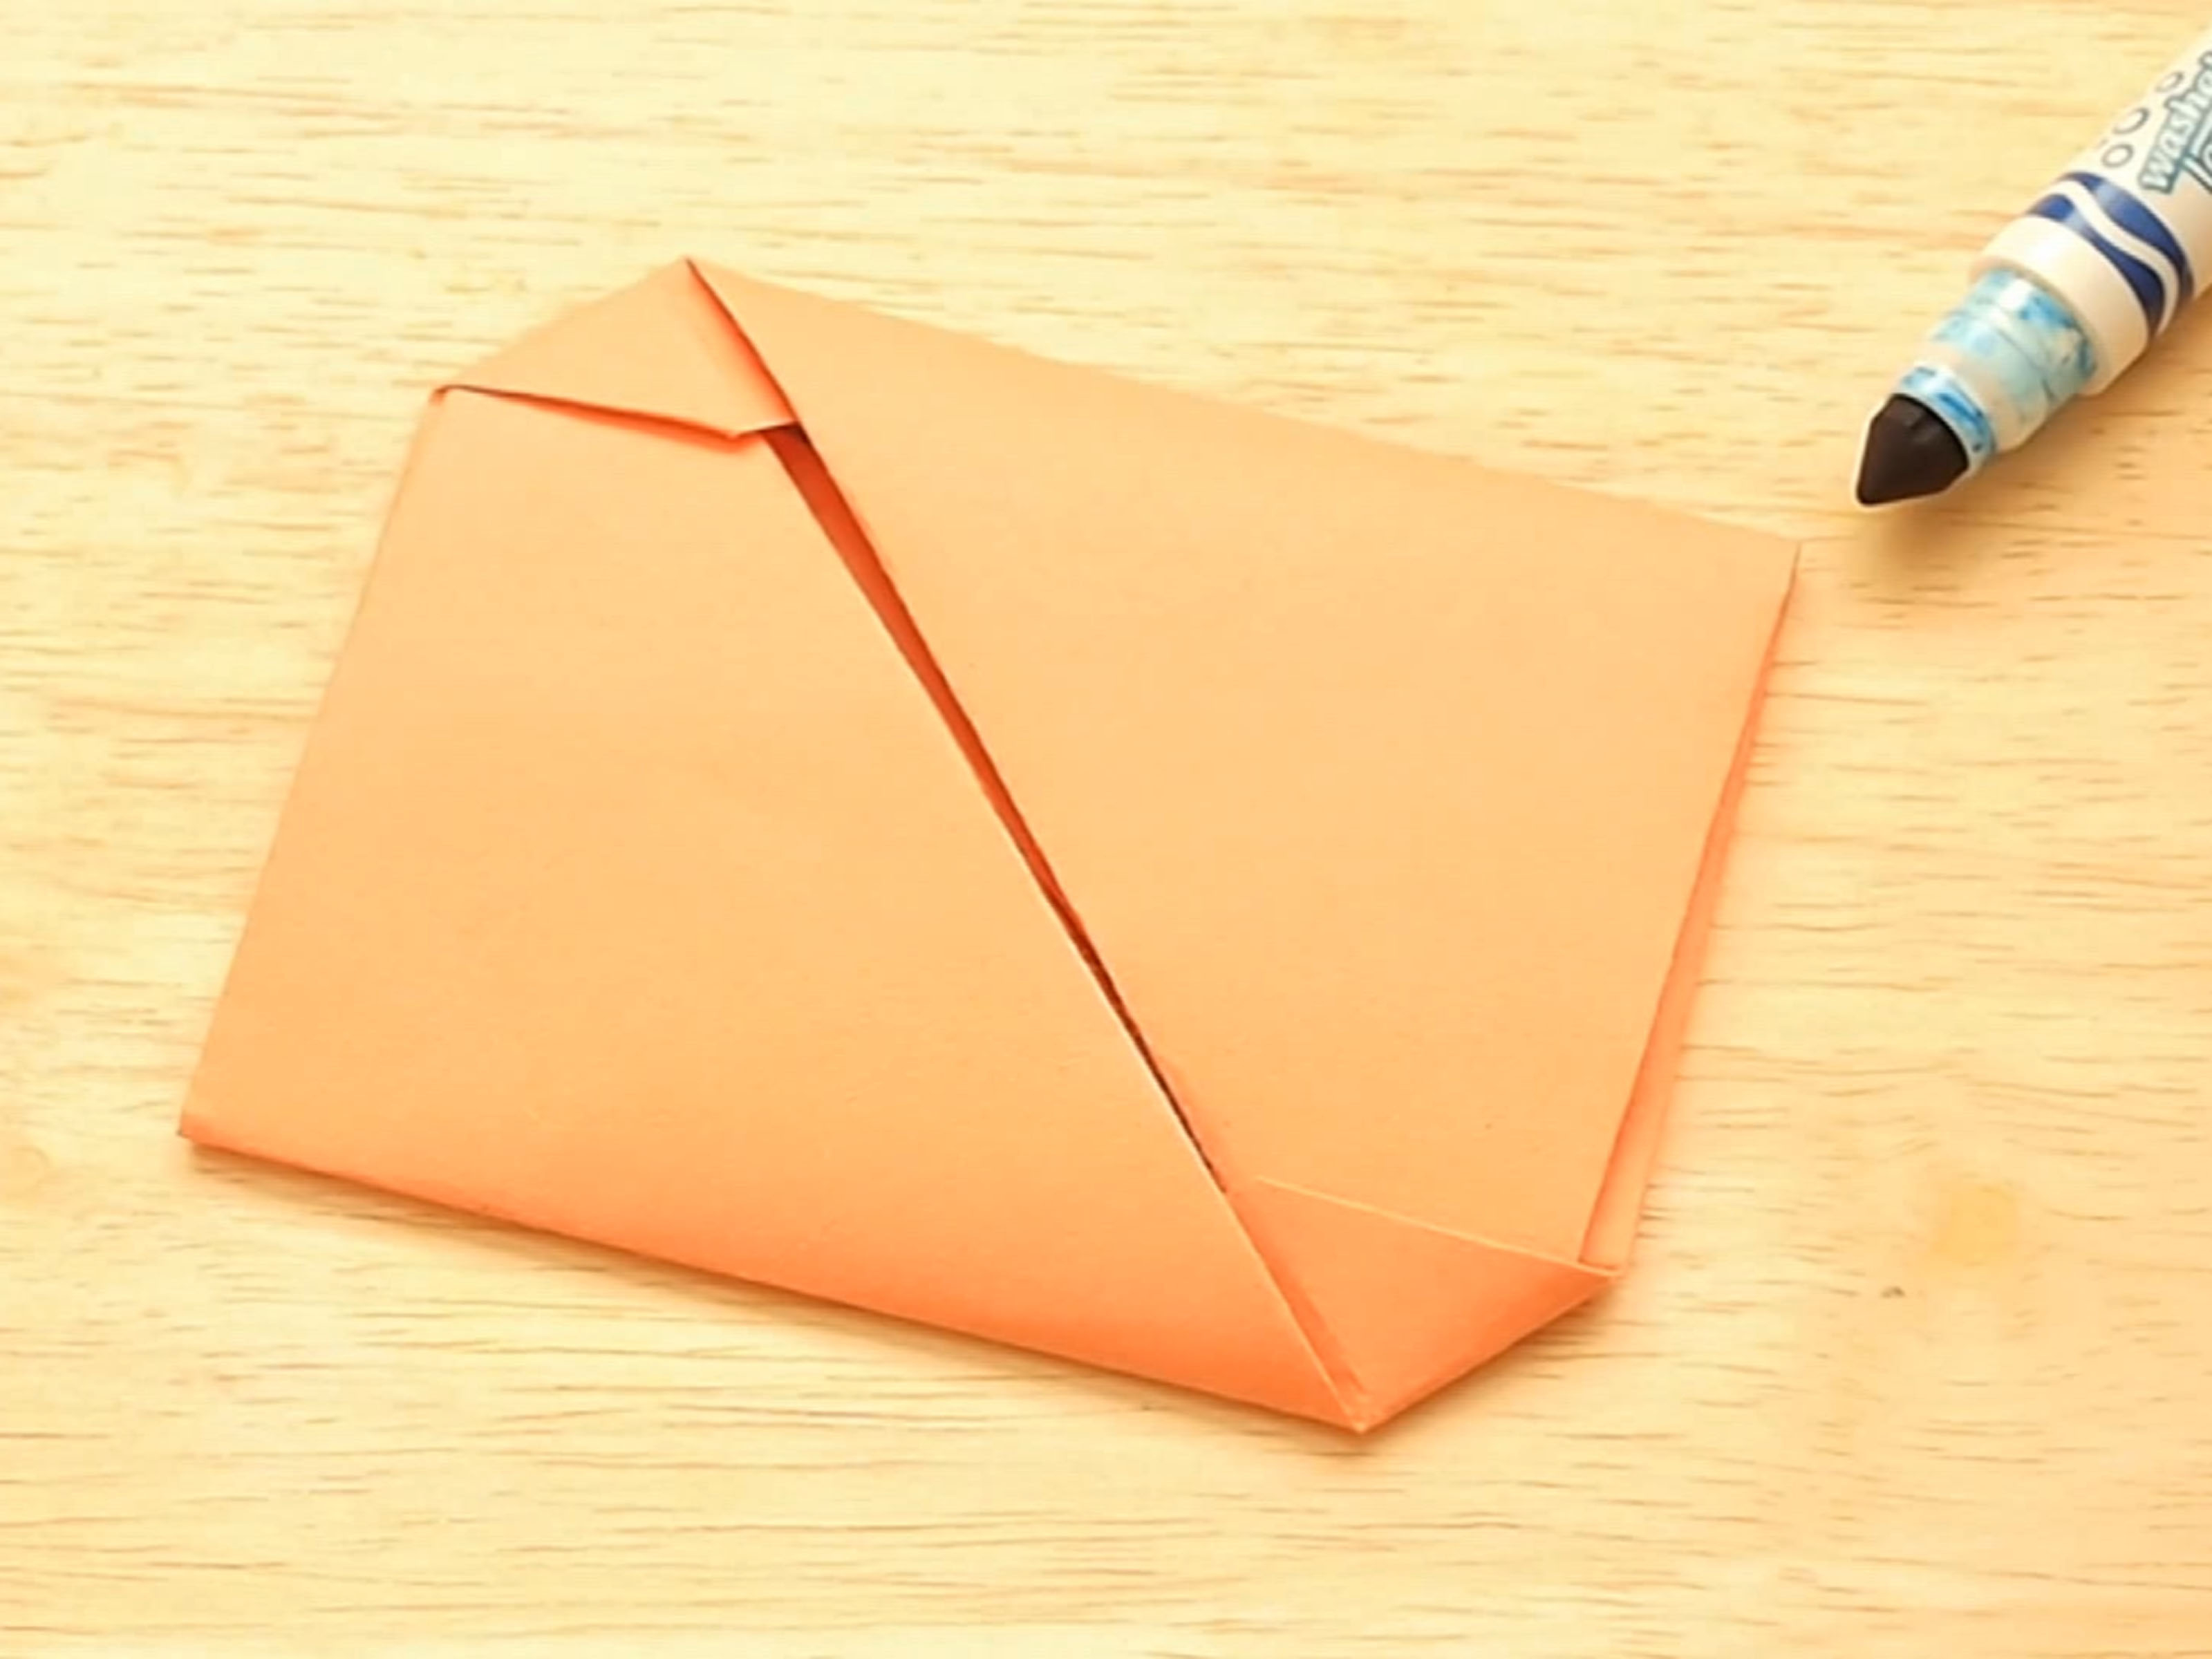 Origami Envelope Rectangle How To Fold An Origami Envelope With Pictures Wikihow